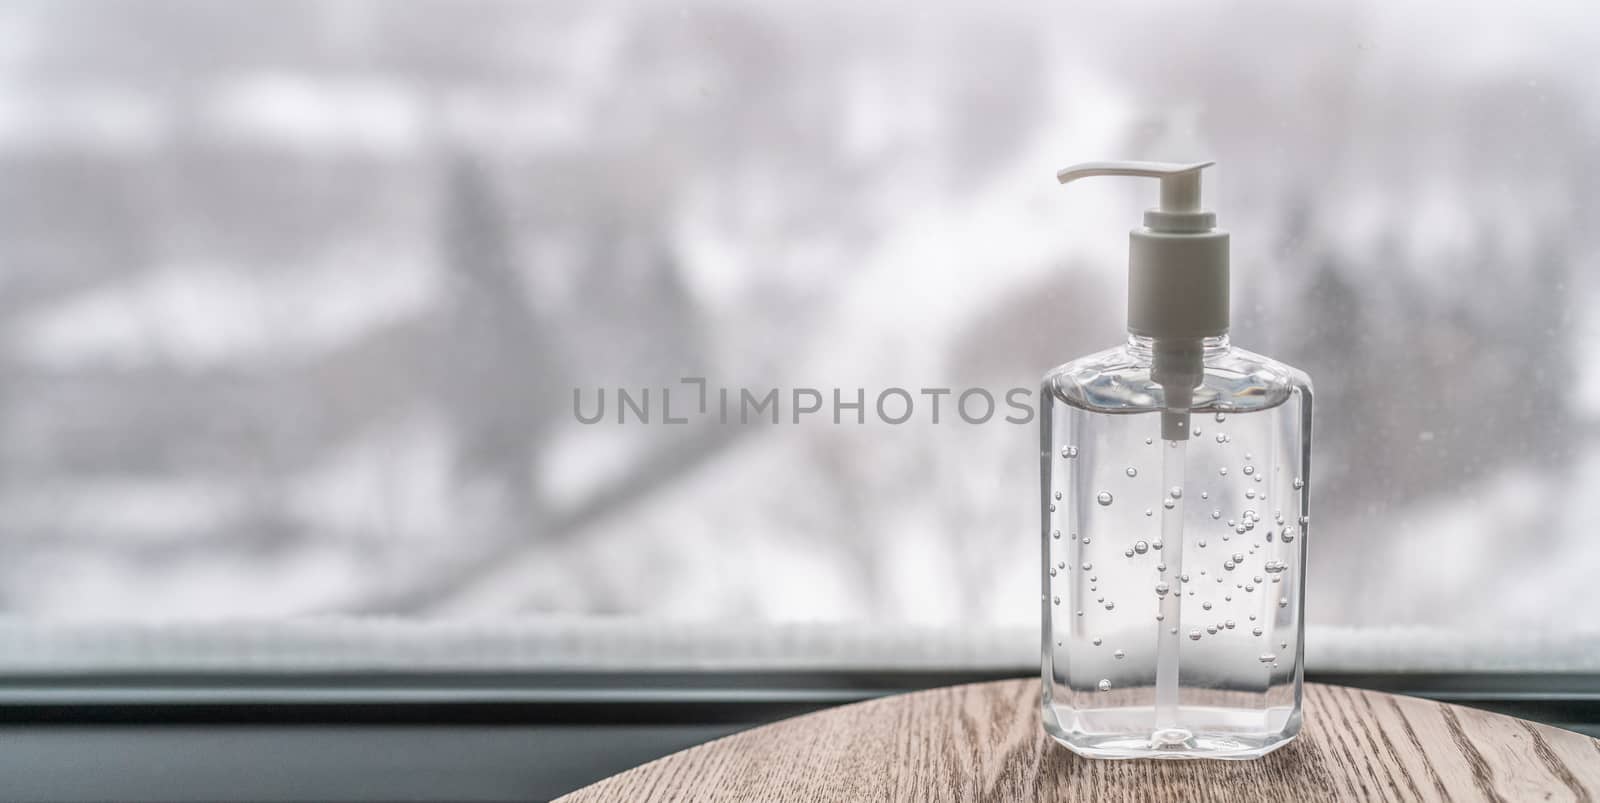 Coronavirus hand sanitizer gel to wash hands for flu virus prevention. Alcohol based antimicrobial disinfectant product for airport, hospital, healthcare and home panoramic banner background.